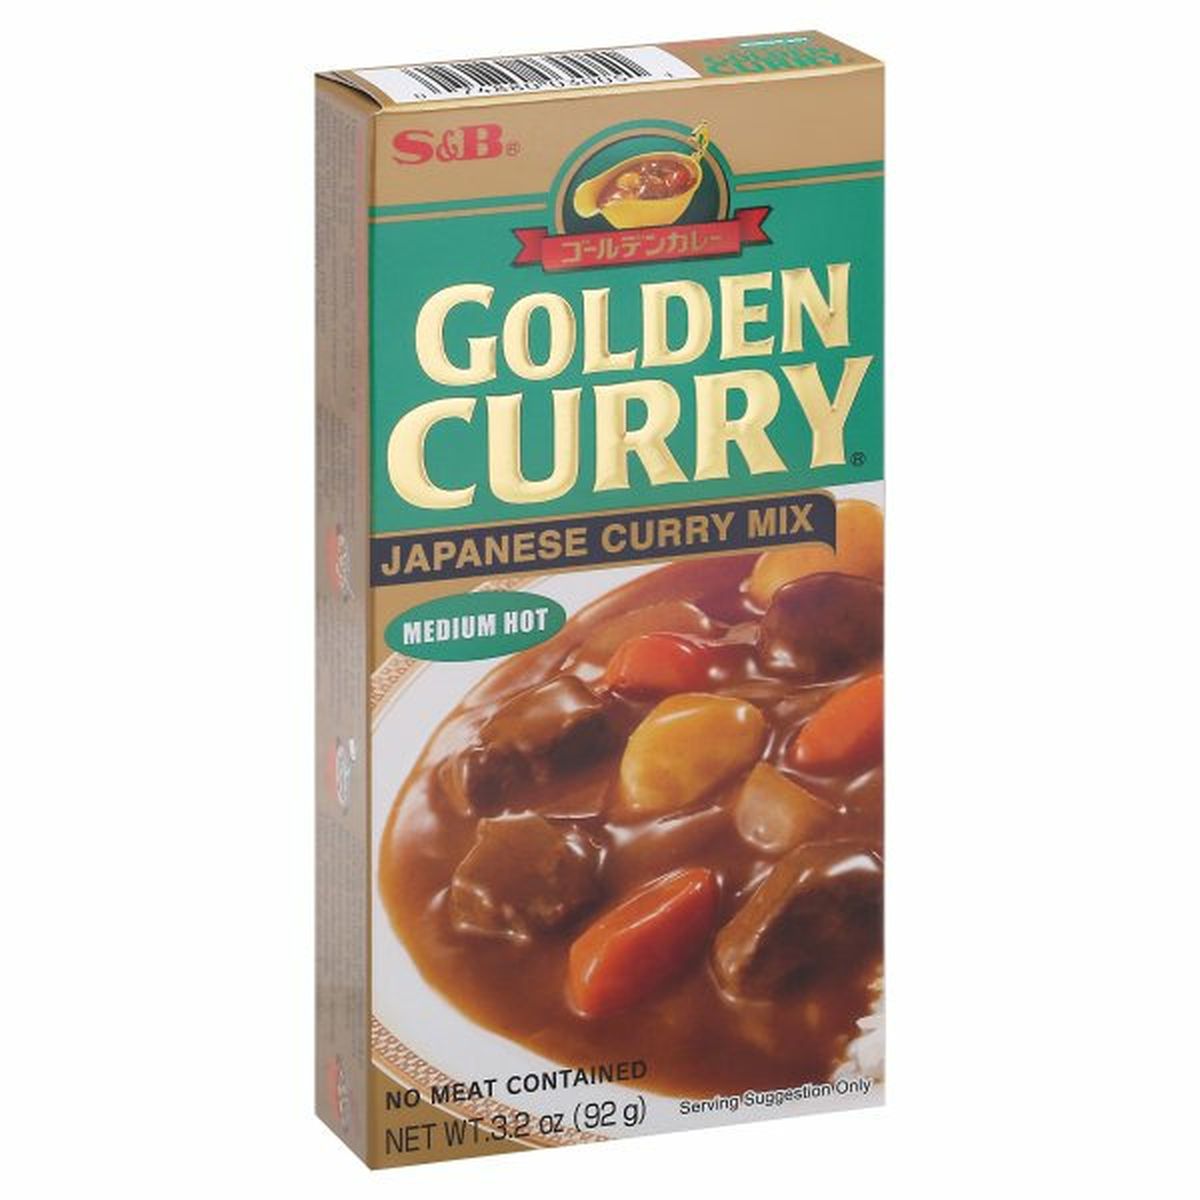 Calories in S&b Golden Curry Curry Mix, Japanese, Medium Hot